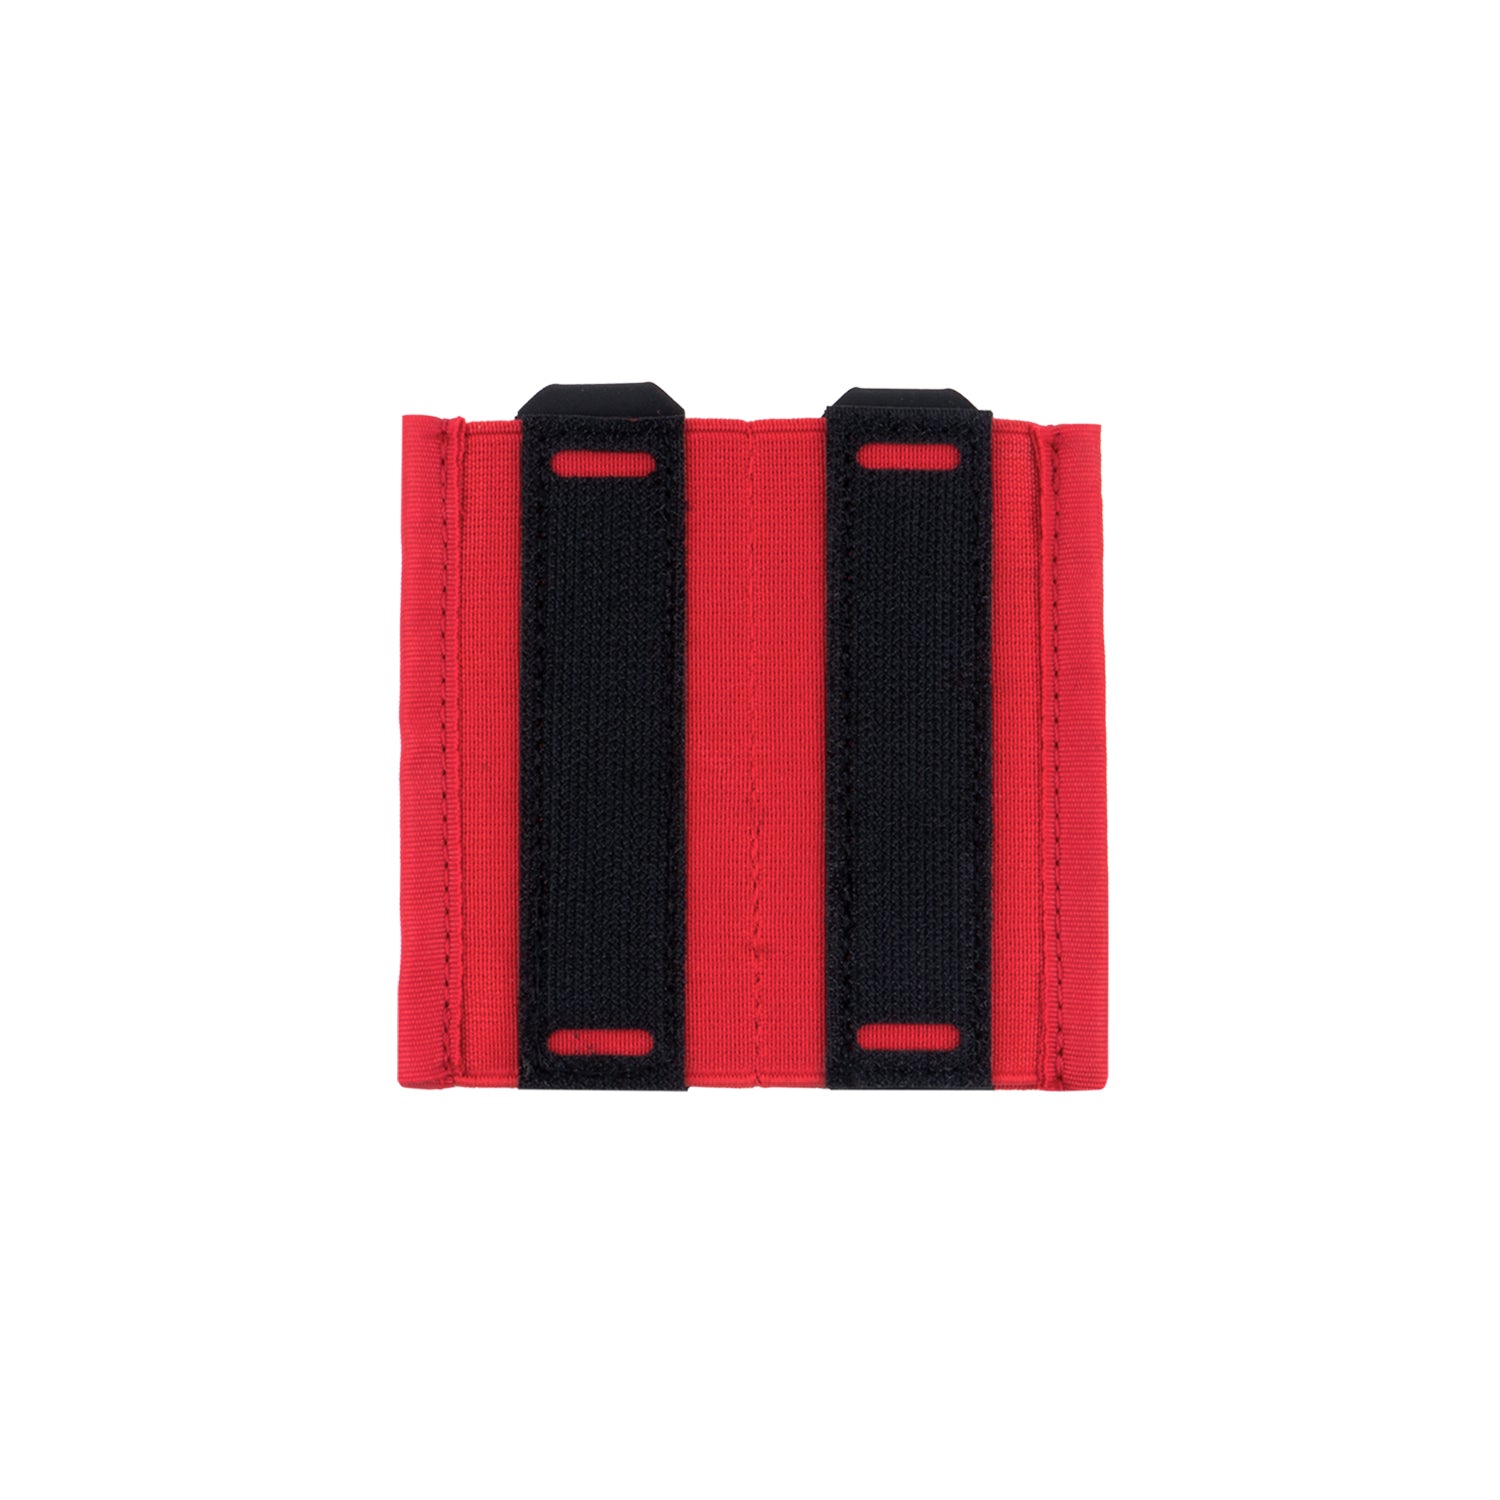 PROTON MAG POUCH INSERT - PISTOL [DOUBLE] - RED